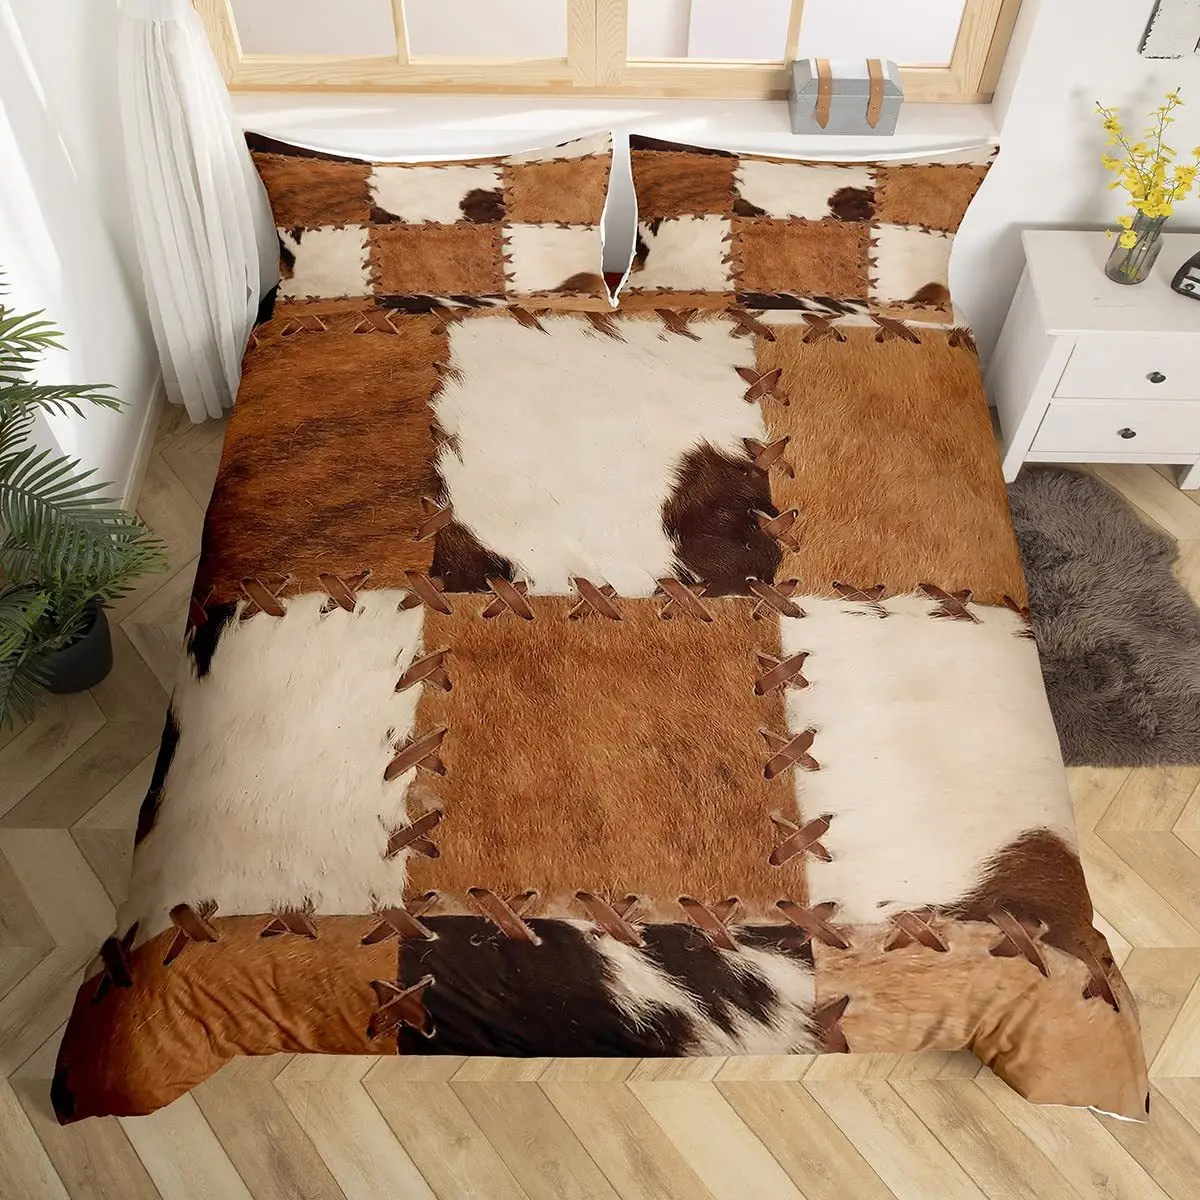 Cowhide King Queen Duvet Cover Patchwork Cow Fur Print Bedding Set Animal Quilt Cover Western Cowboy polyester Comforter Cover